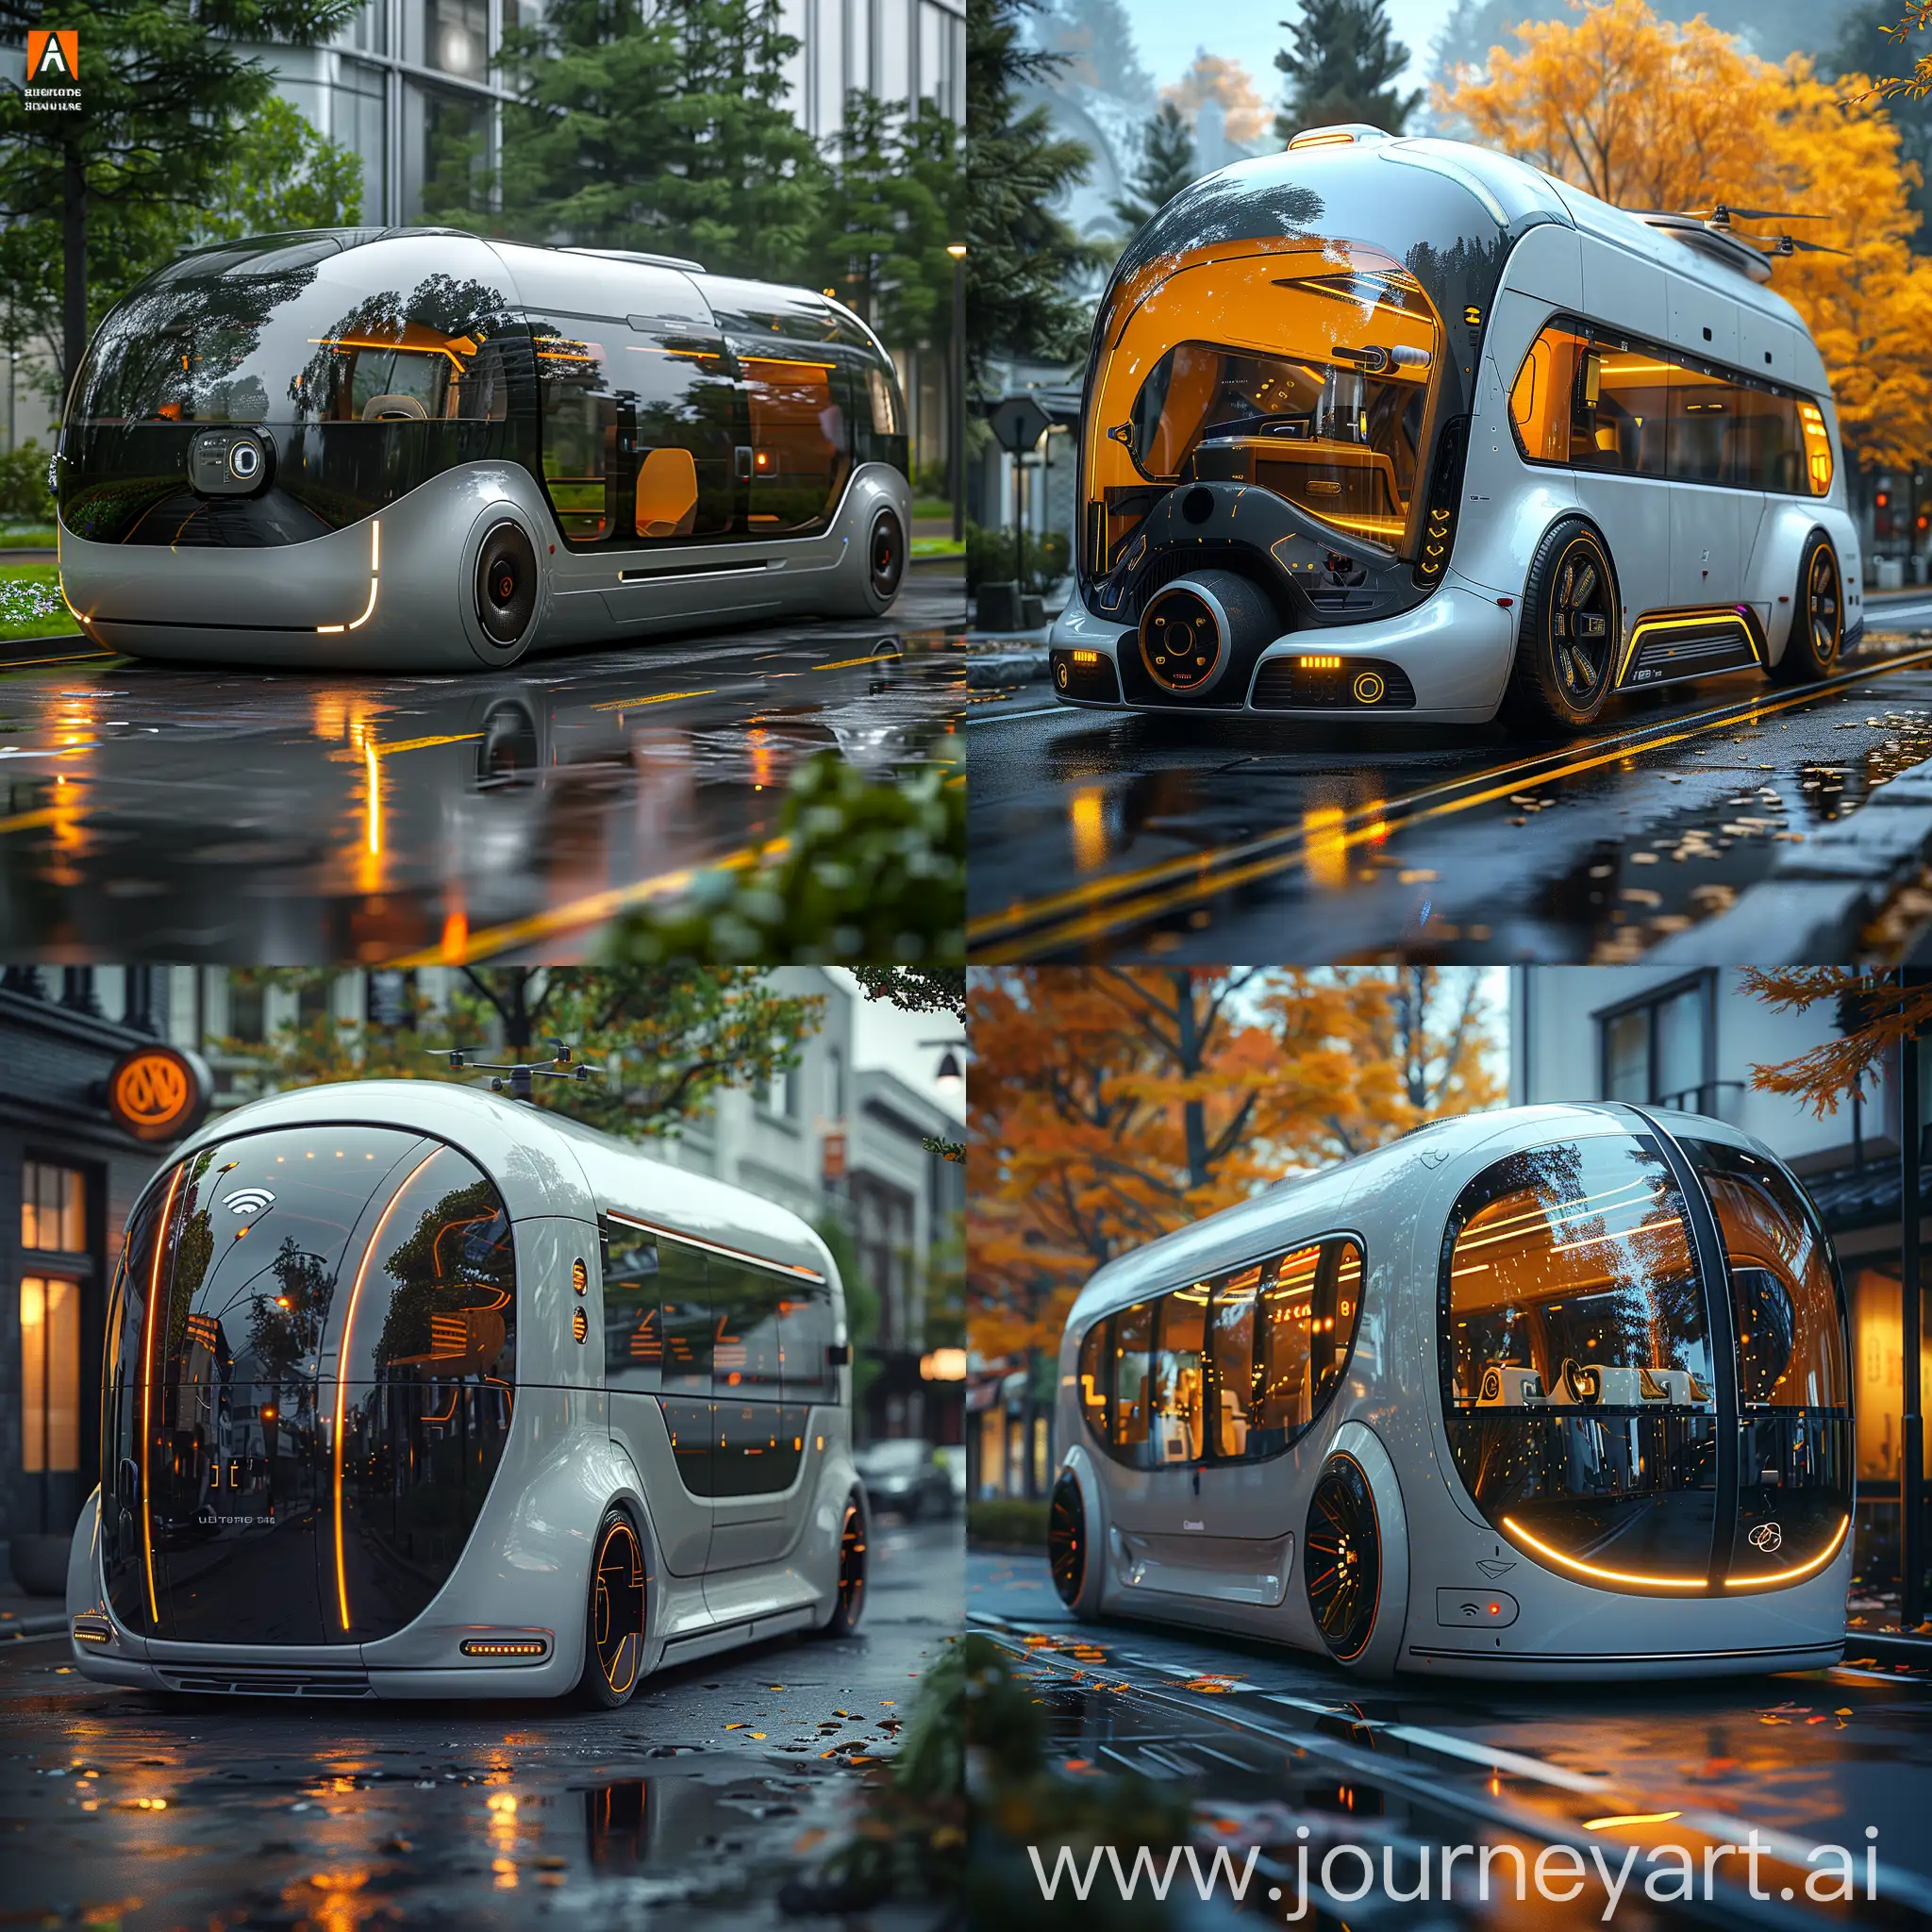 Futuristic microbus, Self-Driving, Clean Energy Source, Modular Design, AI Assistant, Personalization, Smart Materials, Transformation Modes, Drone Delivery, Interconnectivity, octane render --stylize 1000